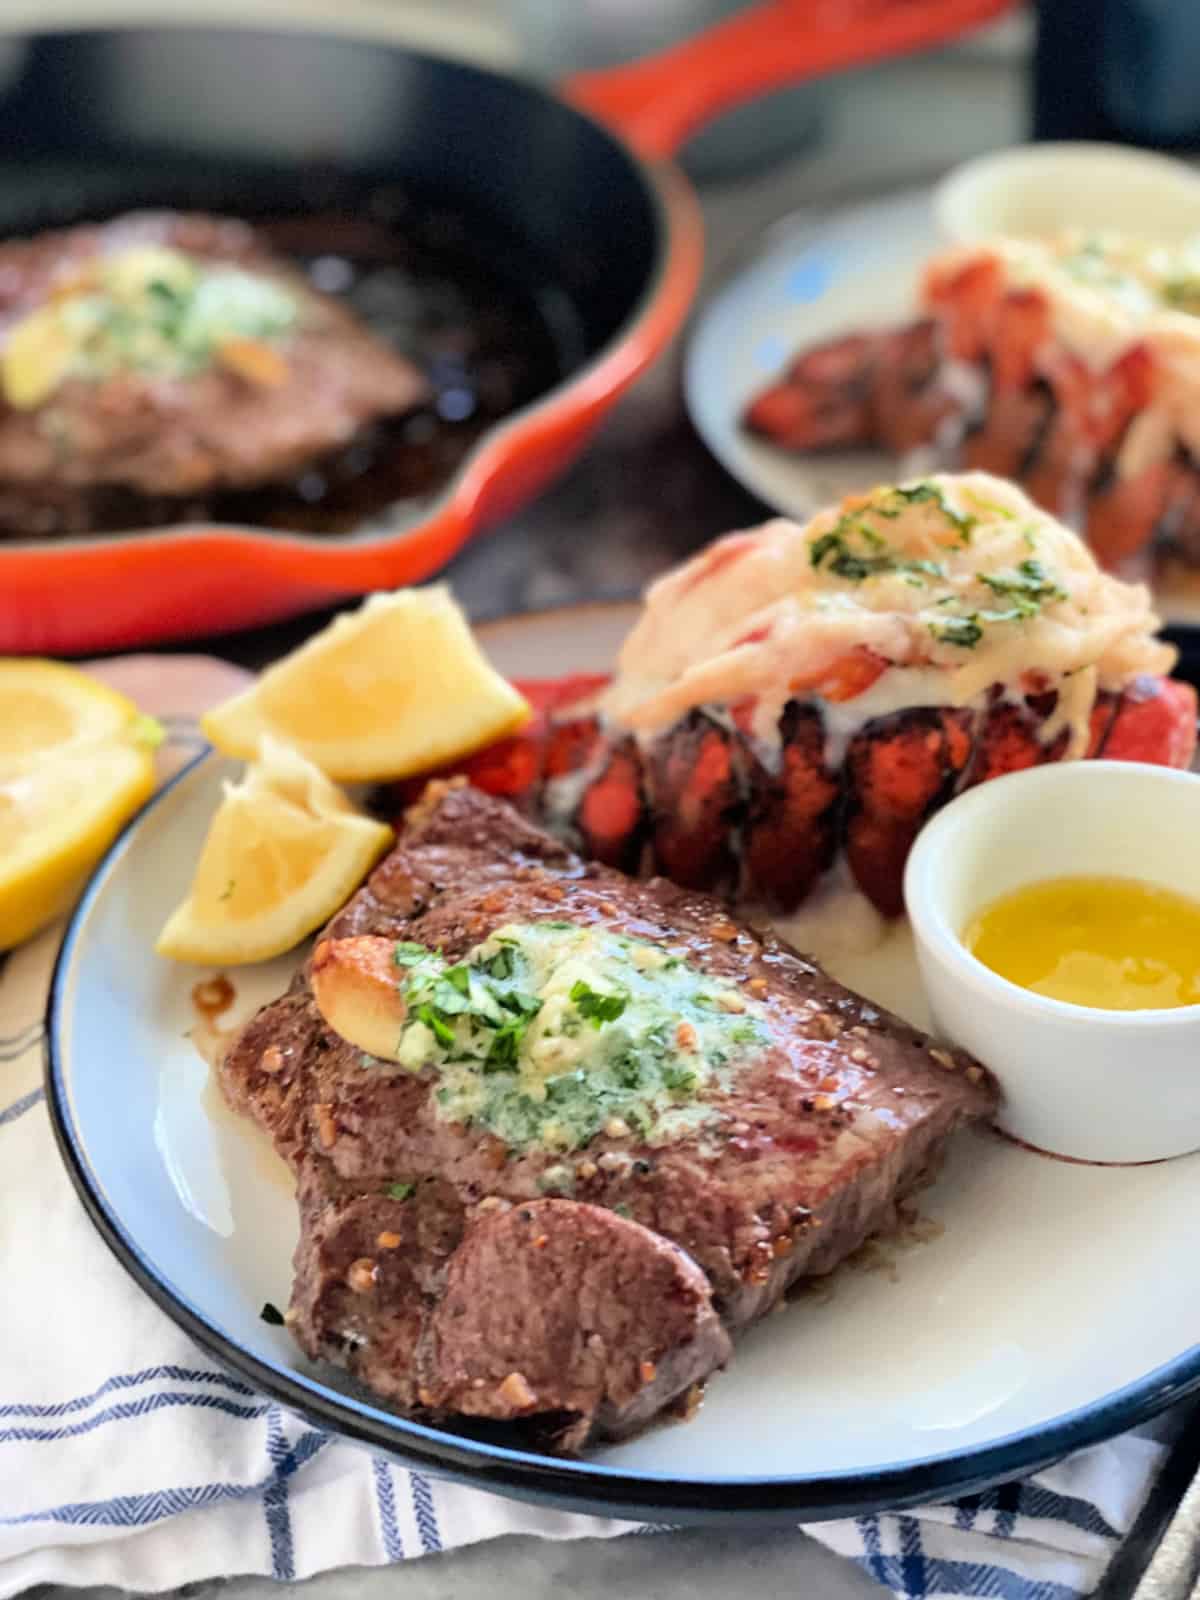 Steak with compound butter and herbs with lemon wedge and lobster tails in background.